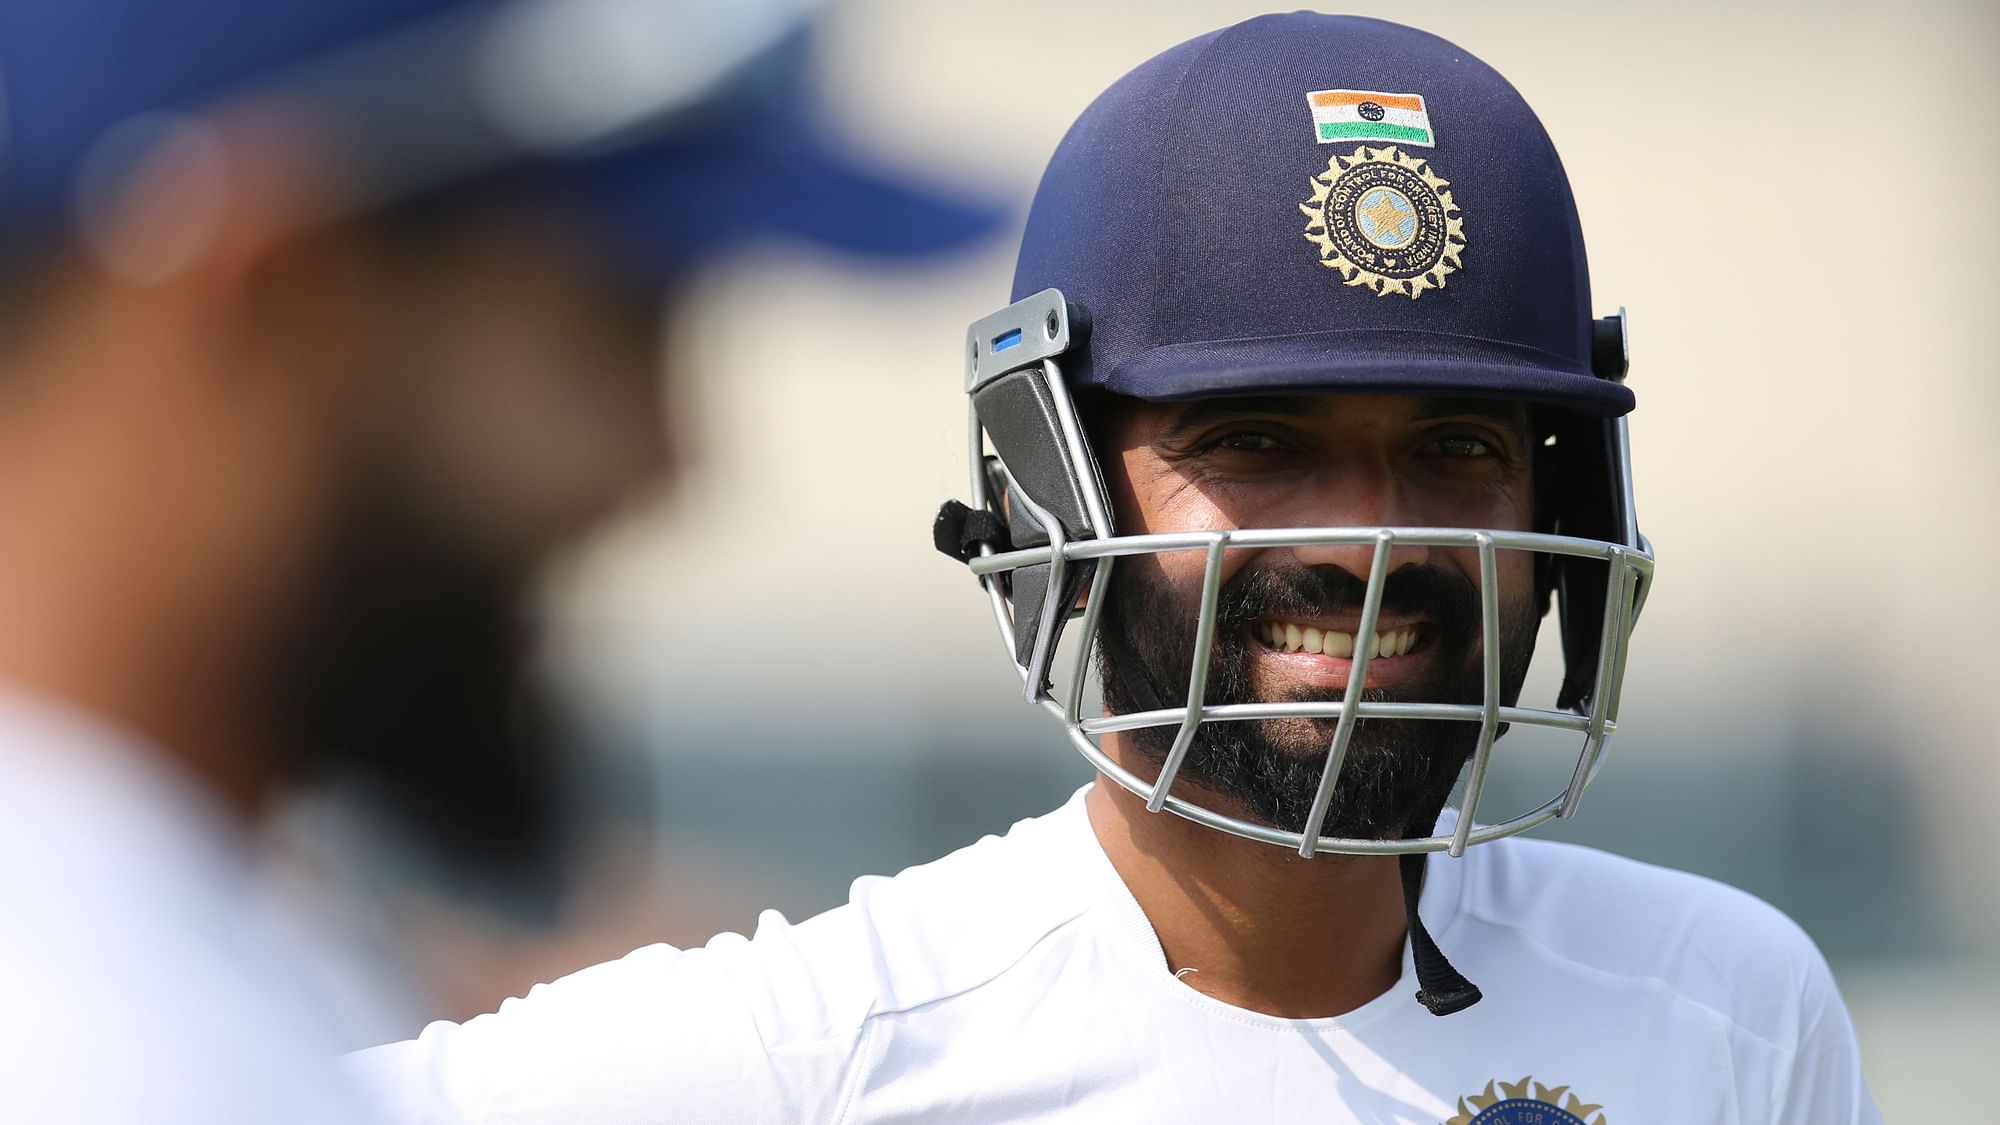 Ajinkya Rahane feels players will get used to the COVID-19 protocols in 2-3 days once they touchdown in the UAE.